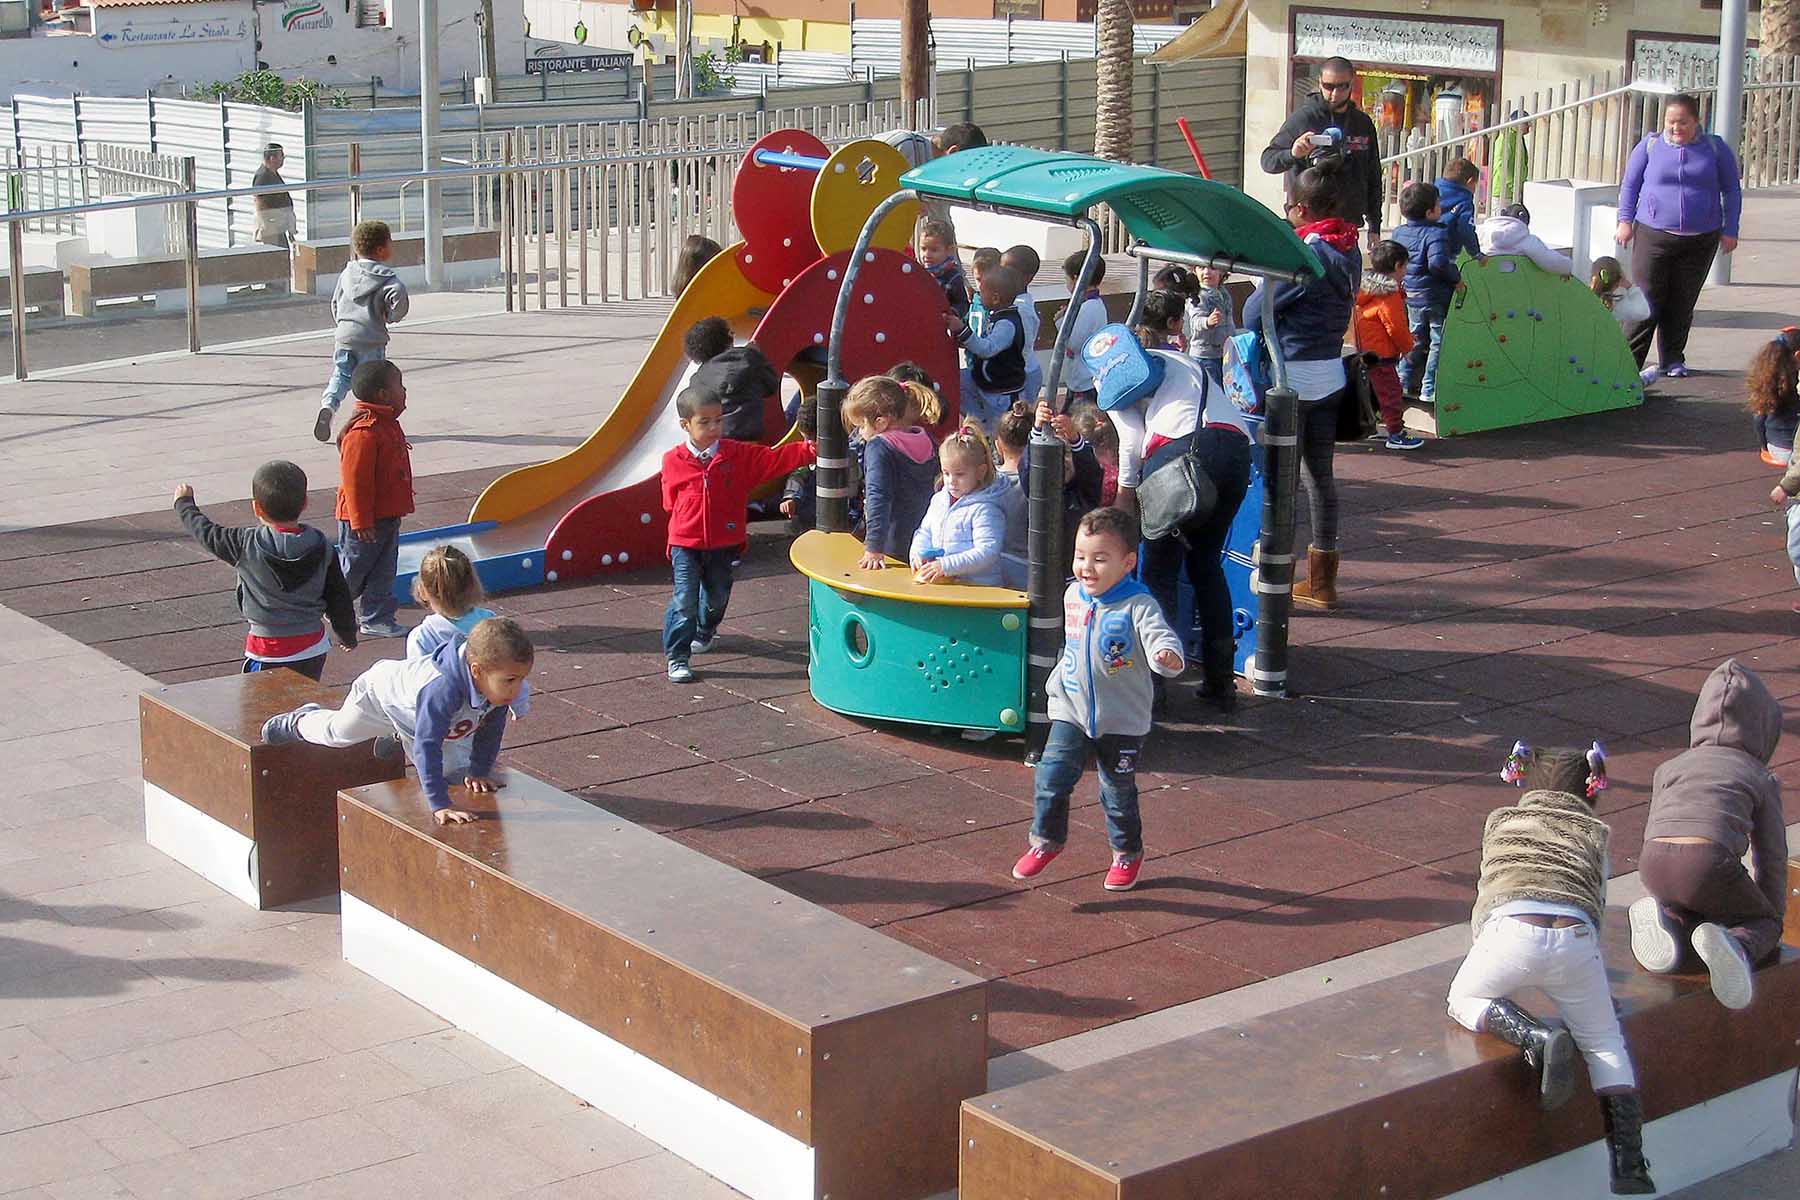 young children playing on a playground in Spain